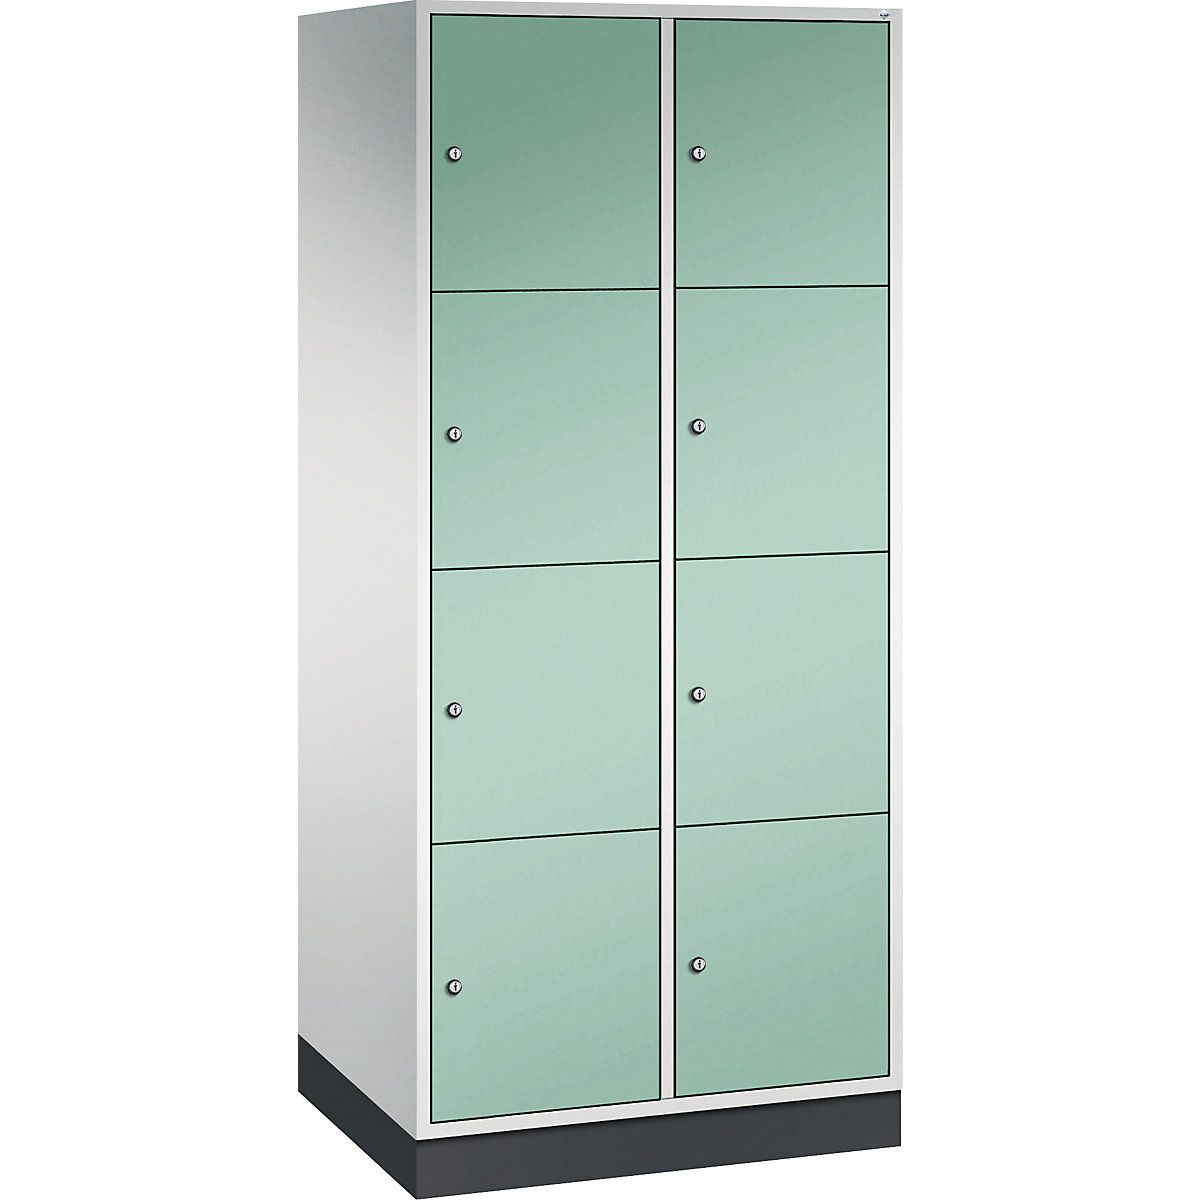 INTRO steel compartment locker, compartment height 435 mm – C+P, WxD 820 x 600 mm, 8 compartments, light grey body, light green doors